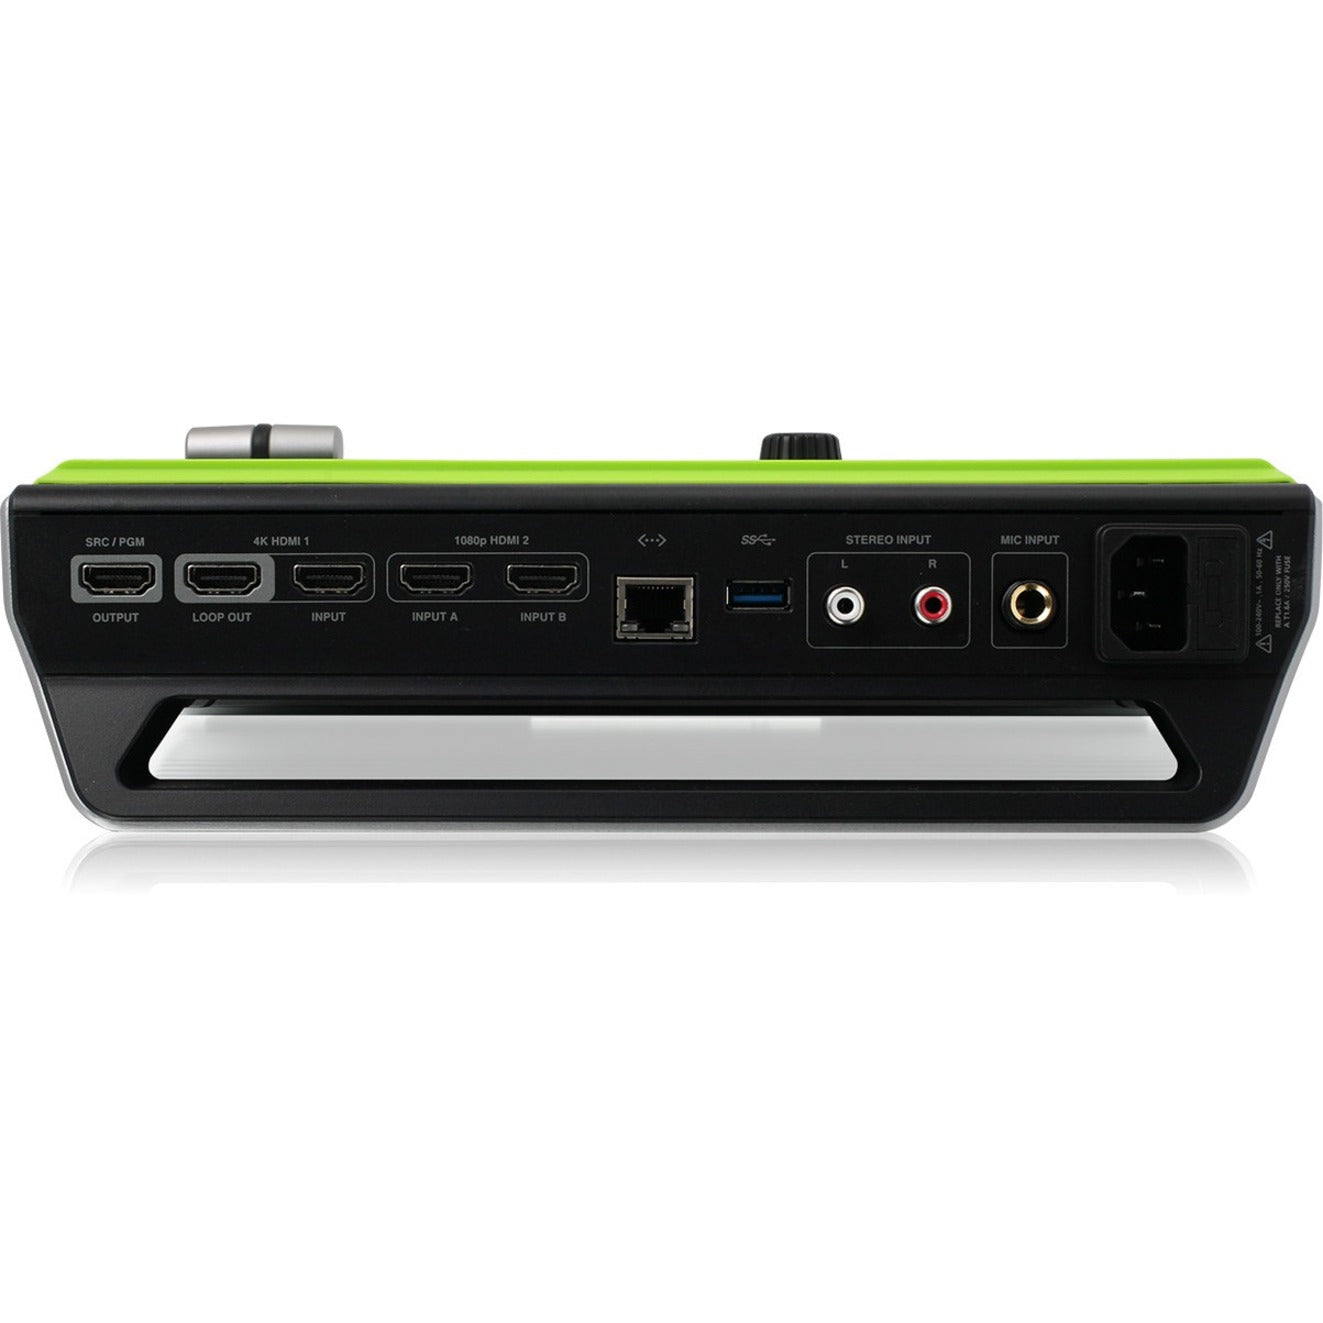 IOGEAR GUV303 UpStream Pro Video Production Switch, 4K HDMI In/Out, USB Connectivity, 1 Year Warranty